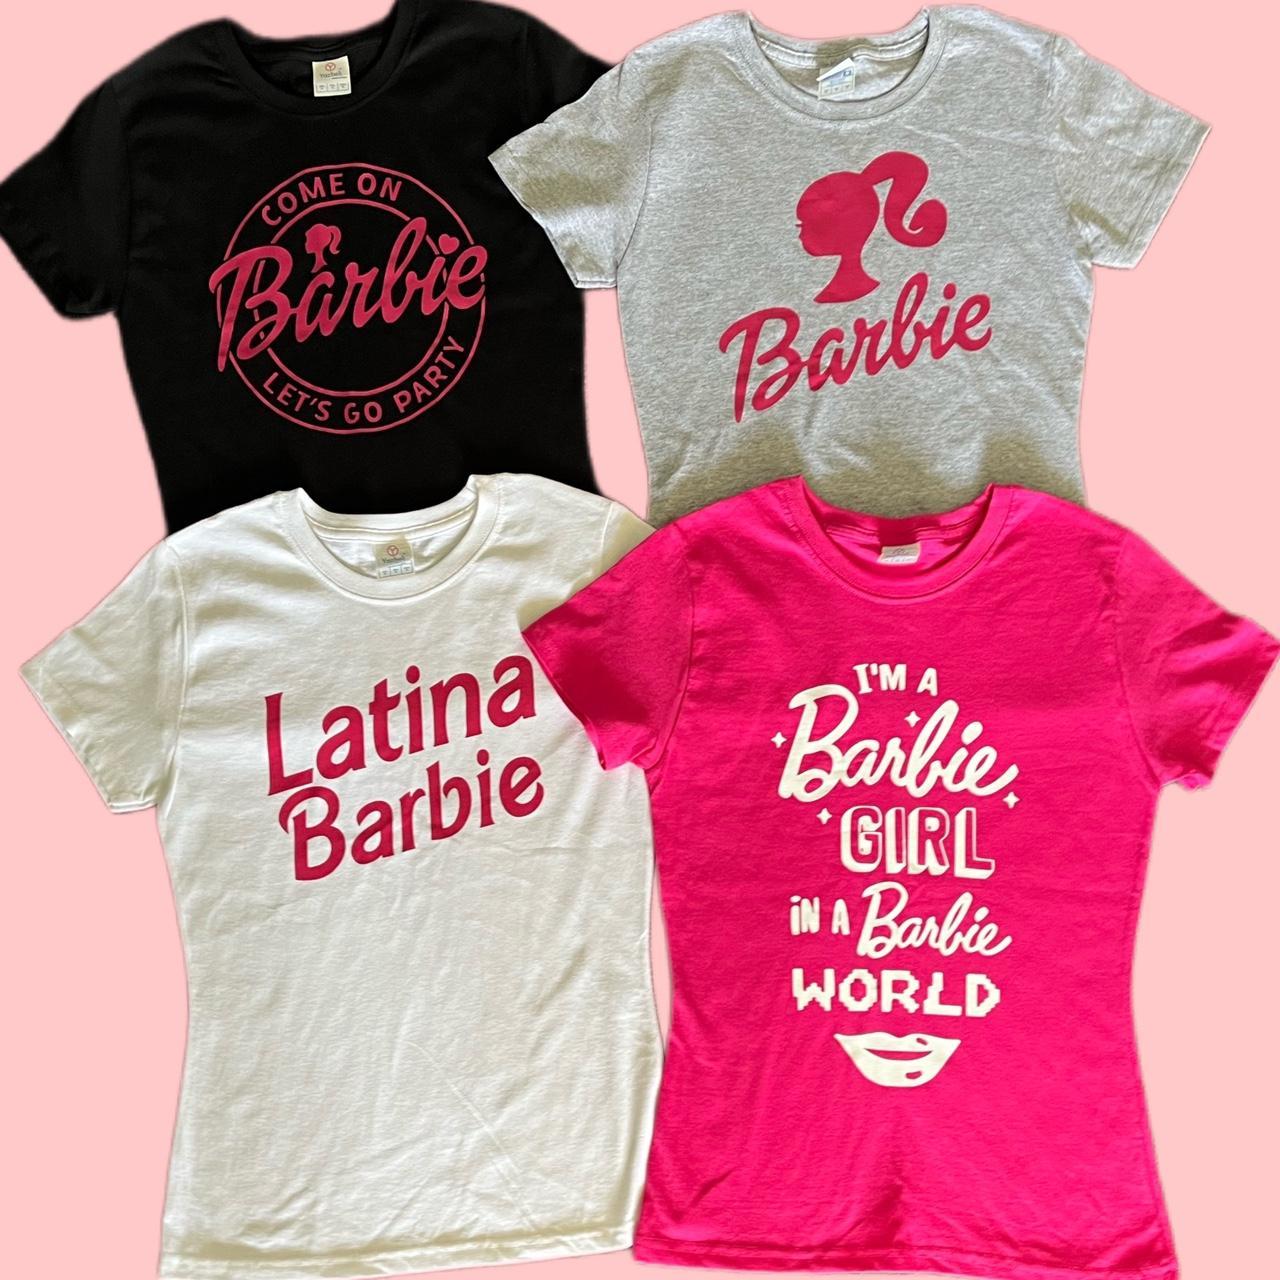 The Barbie merch has gone too far now